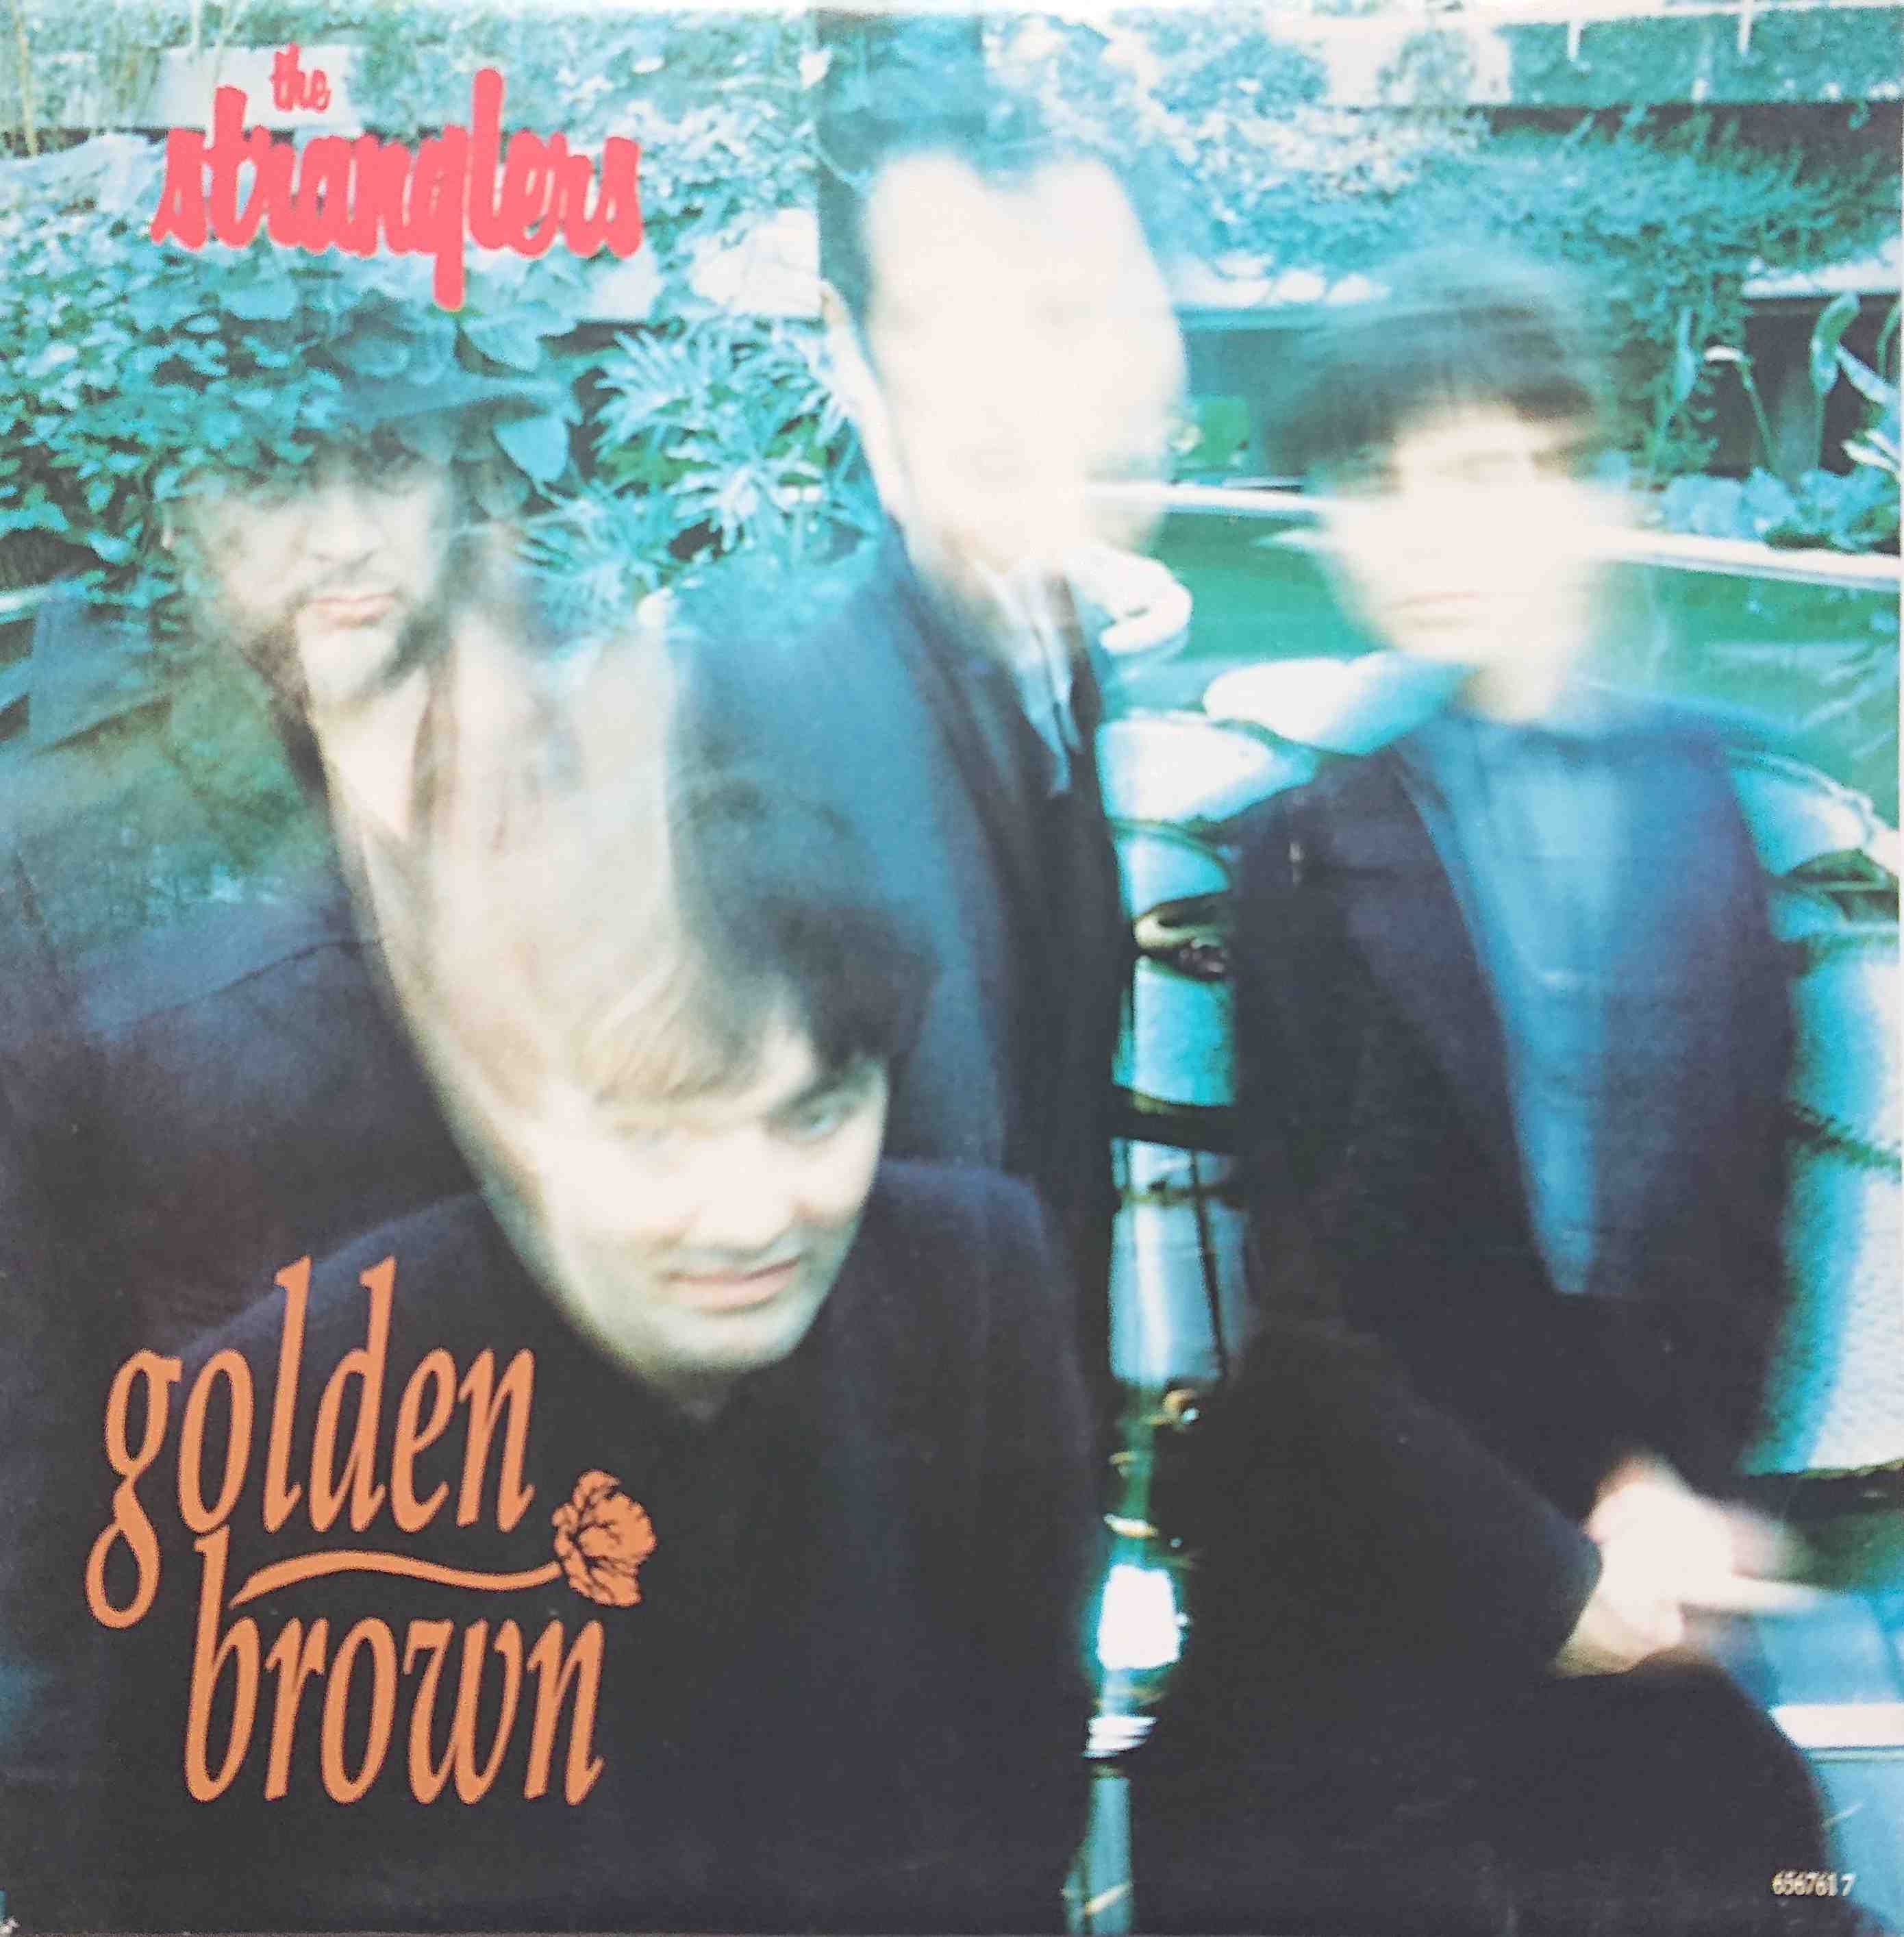 Picture of Golden brown by artist The Stranglers from The Stranglers singles